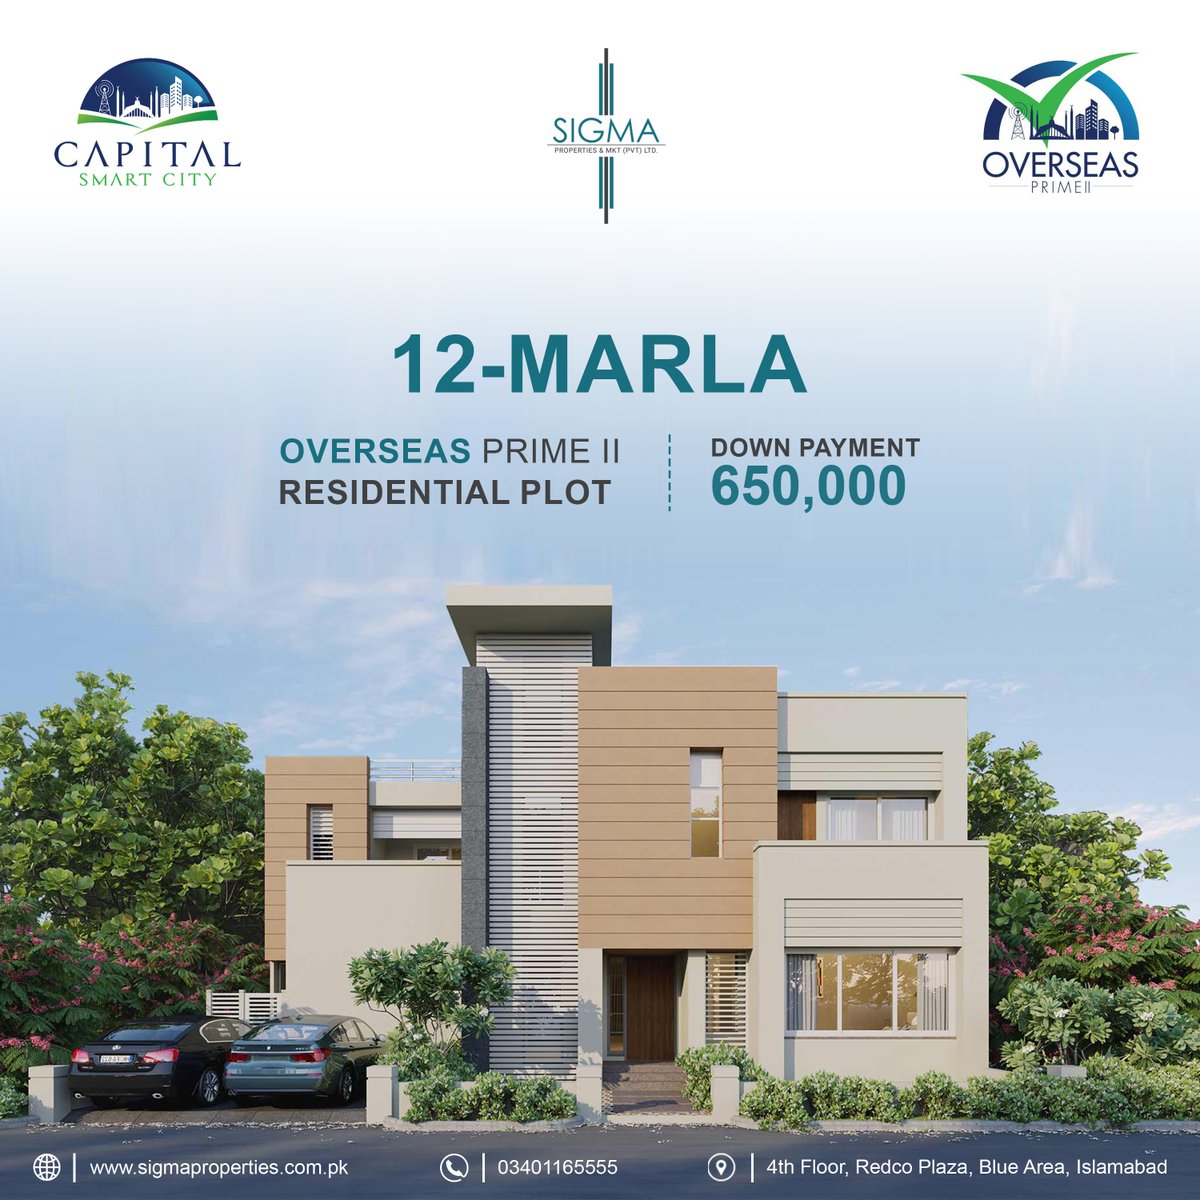 The 12-marla residential plot in Capital Smart City Overseas Prime II is available at lower prices. You can book it at only PKR 650,000. #capitalsmartcity #smartcity #GroundBreaking #MotorwayInterchange #Works #Ground #Breaking #Motorway #Interchange #InterchangeWorks #opening